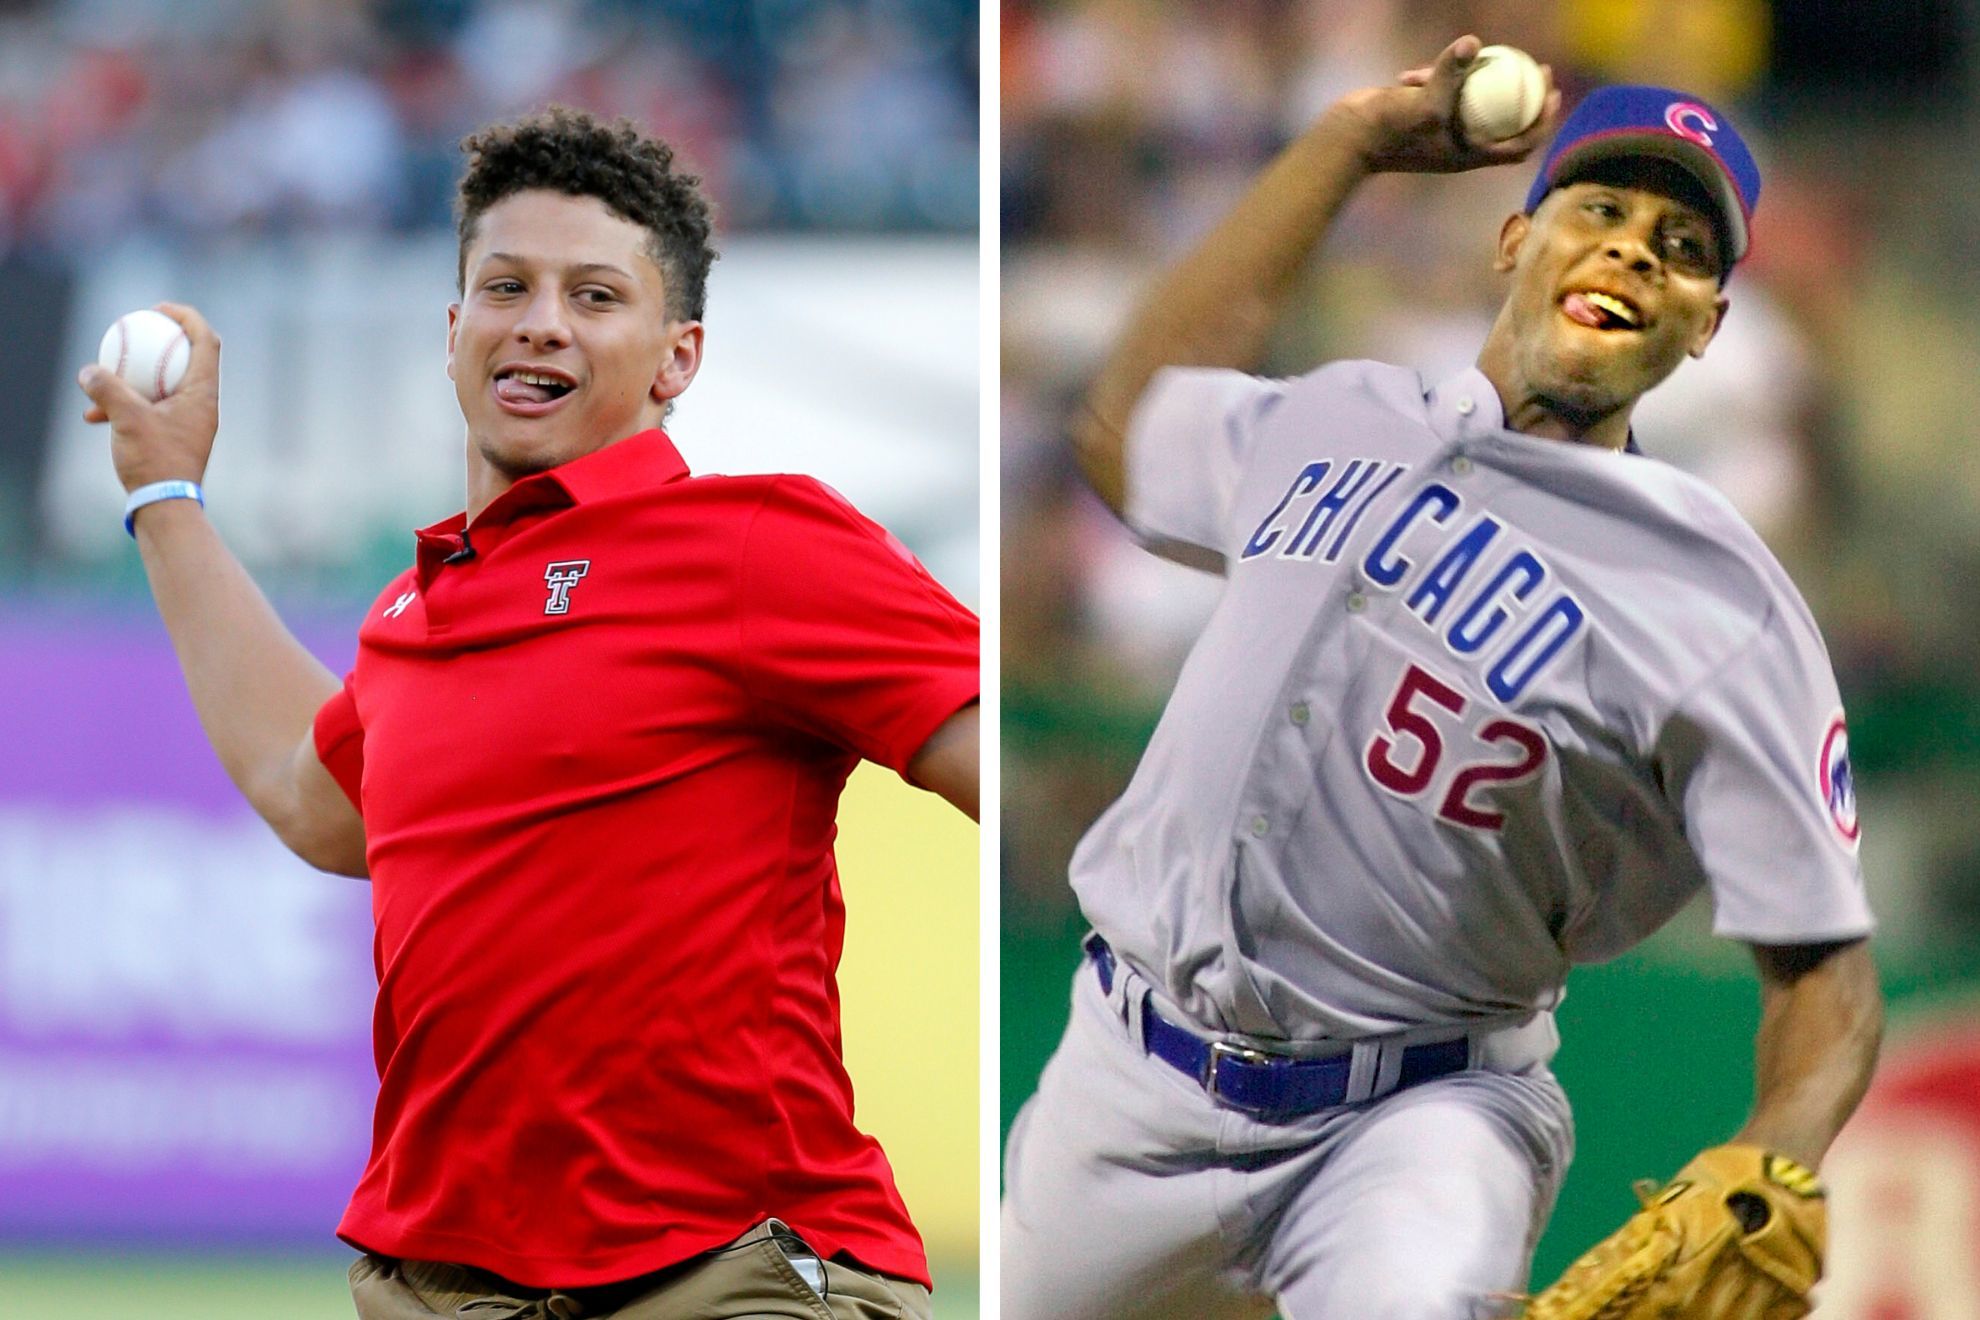 Patrick Mahomes wants to prove he can still be an elite MLB pitcher like his dad